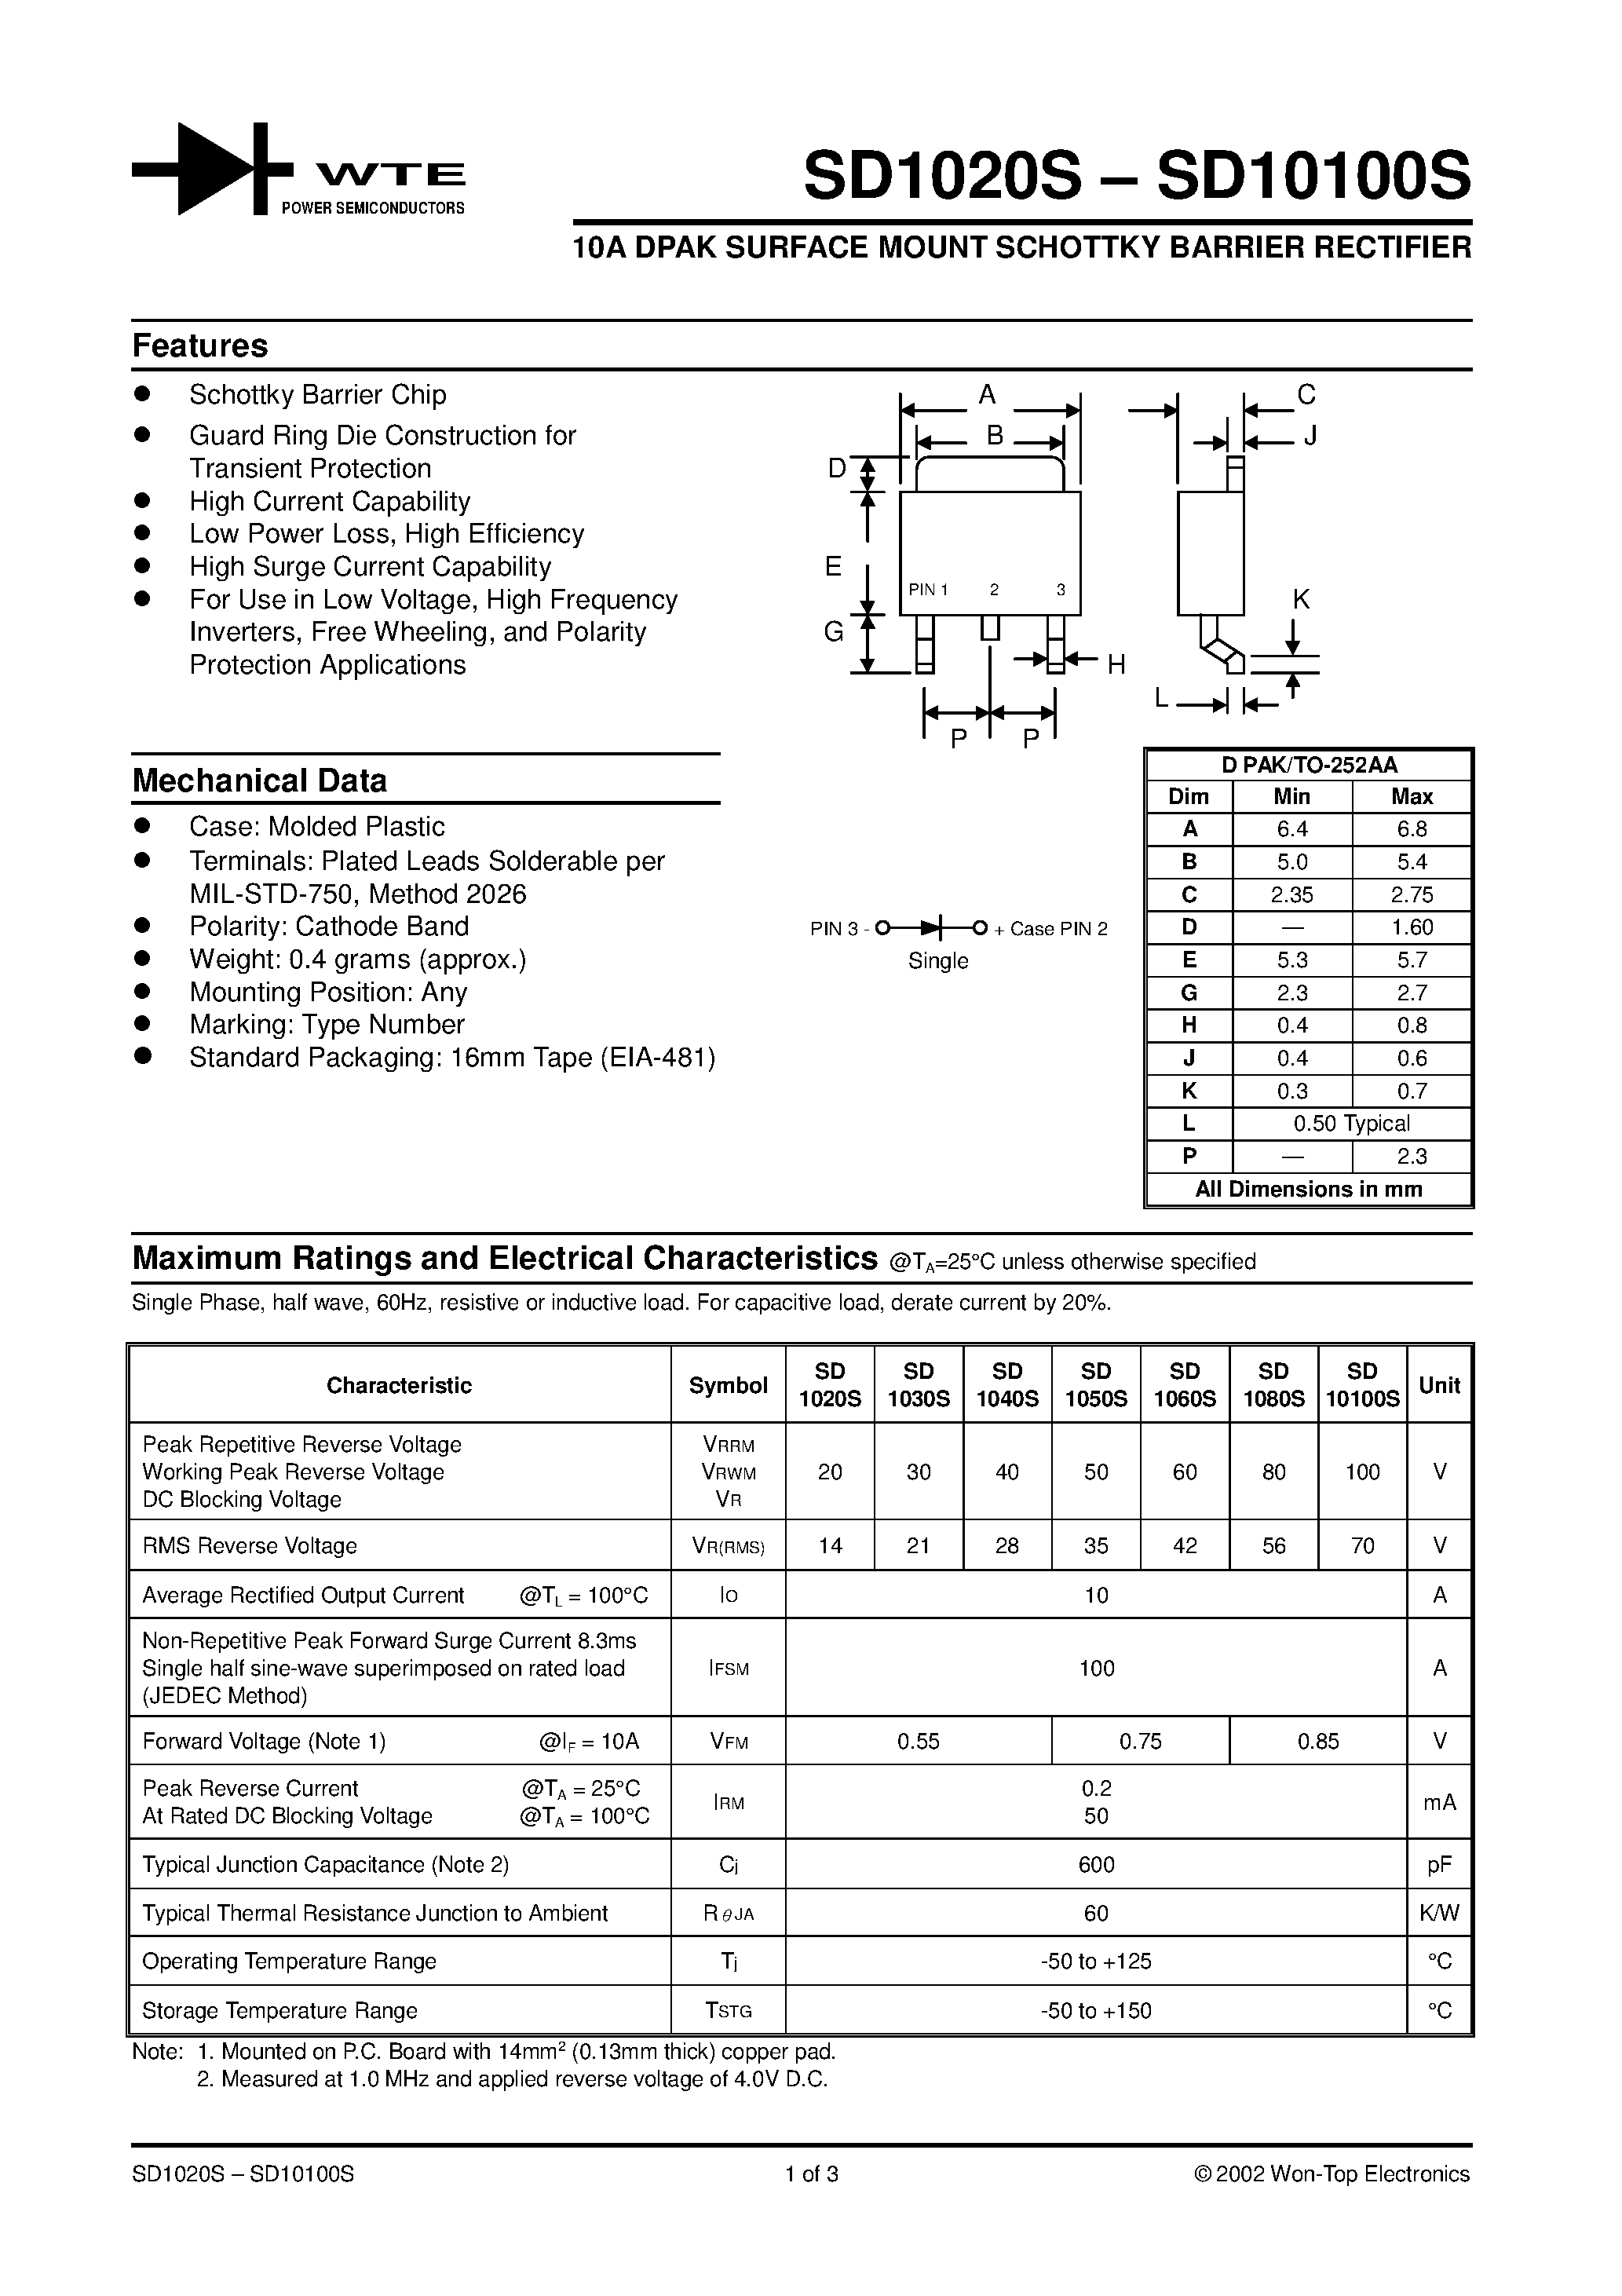 Datasheet SD10100S - (SD1020S - SD10100S) 10A DPAK SURFACE MOUNT SCHOTTKY BARRIER RECTIFIER page 1